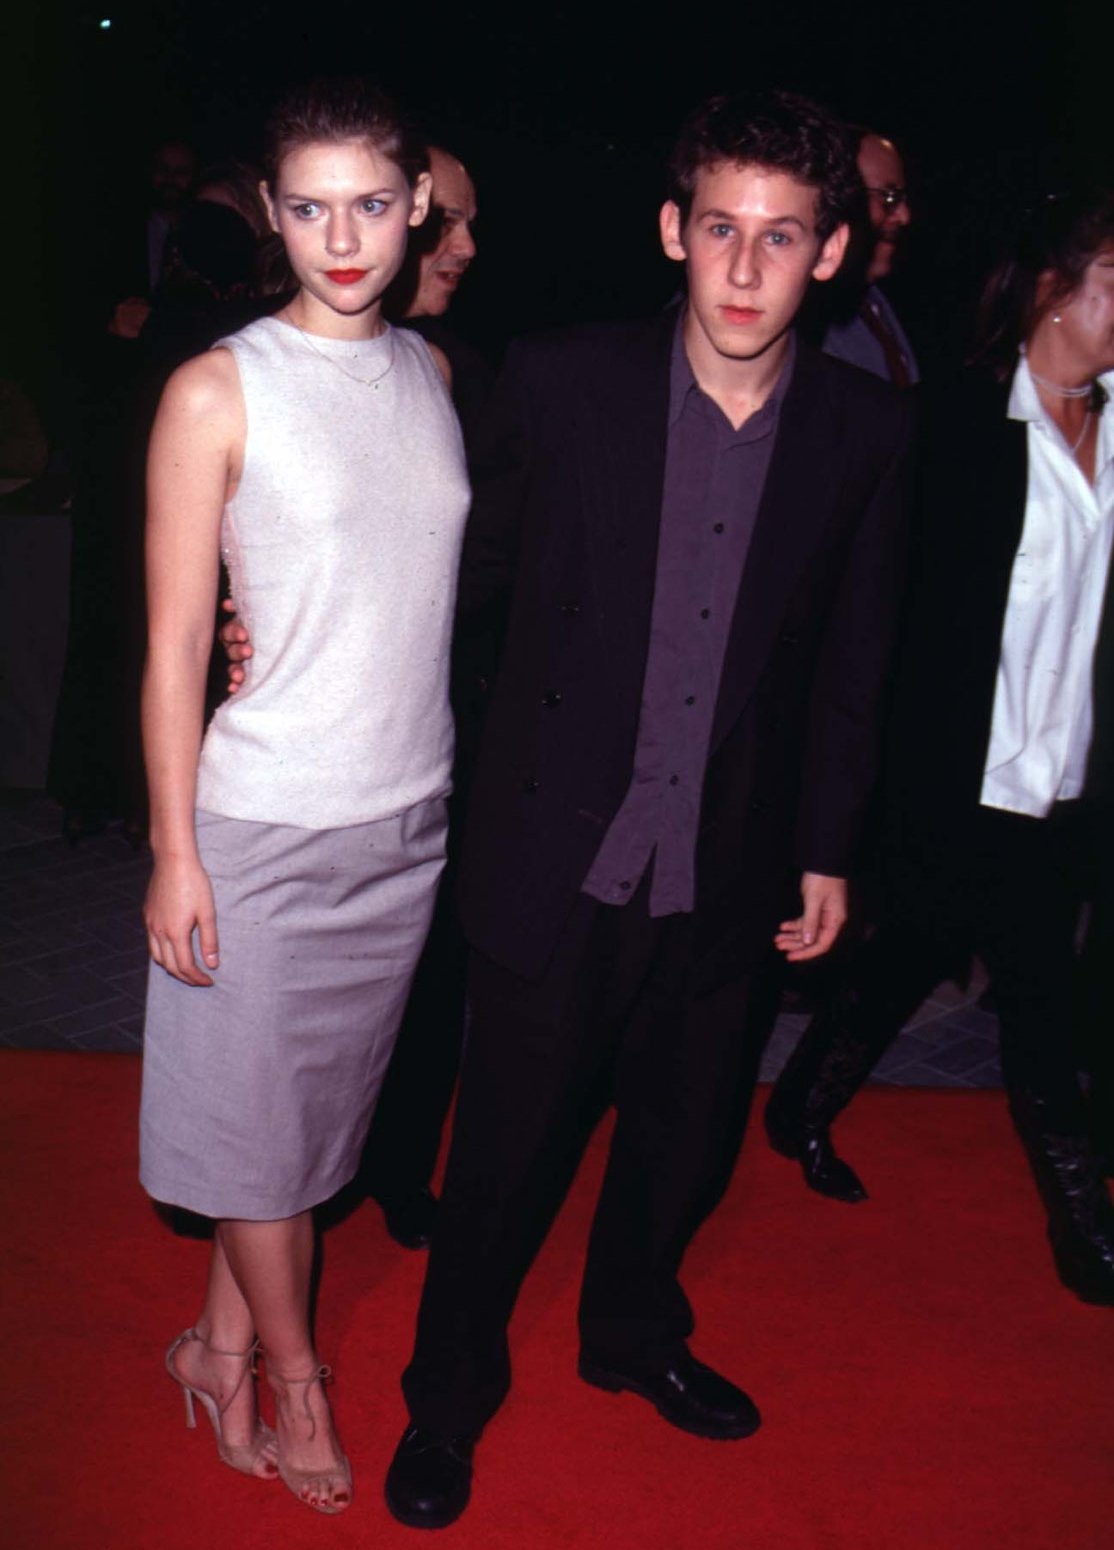 Claire Danes and Aussie singer Ben Lee dated from 1997 until 2003